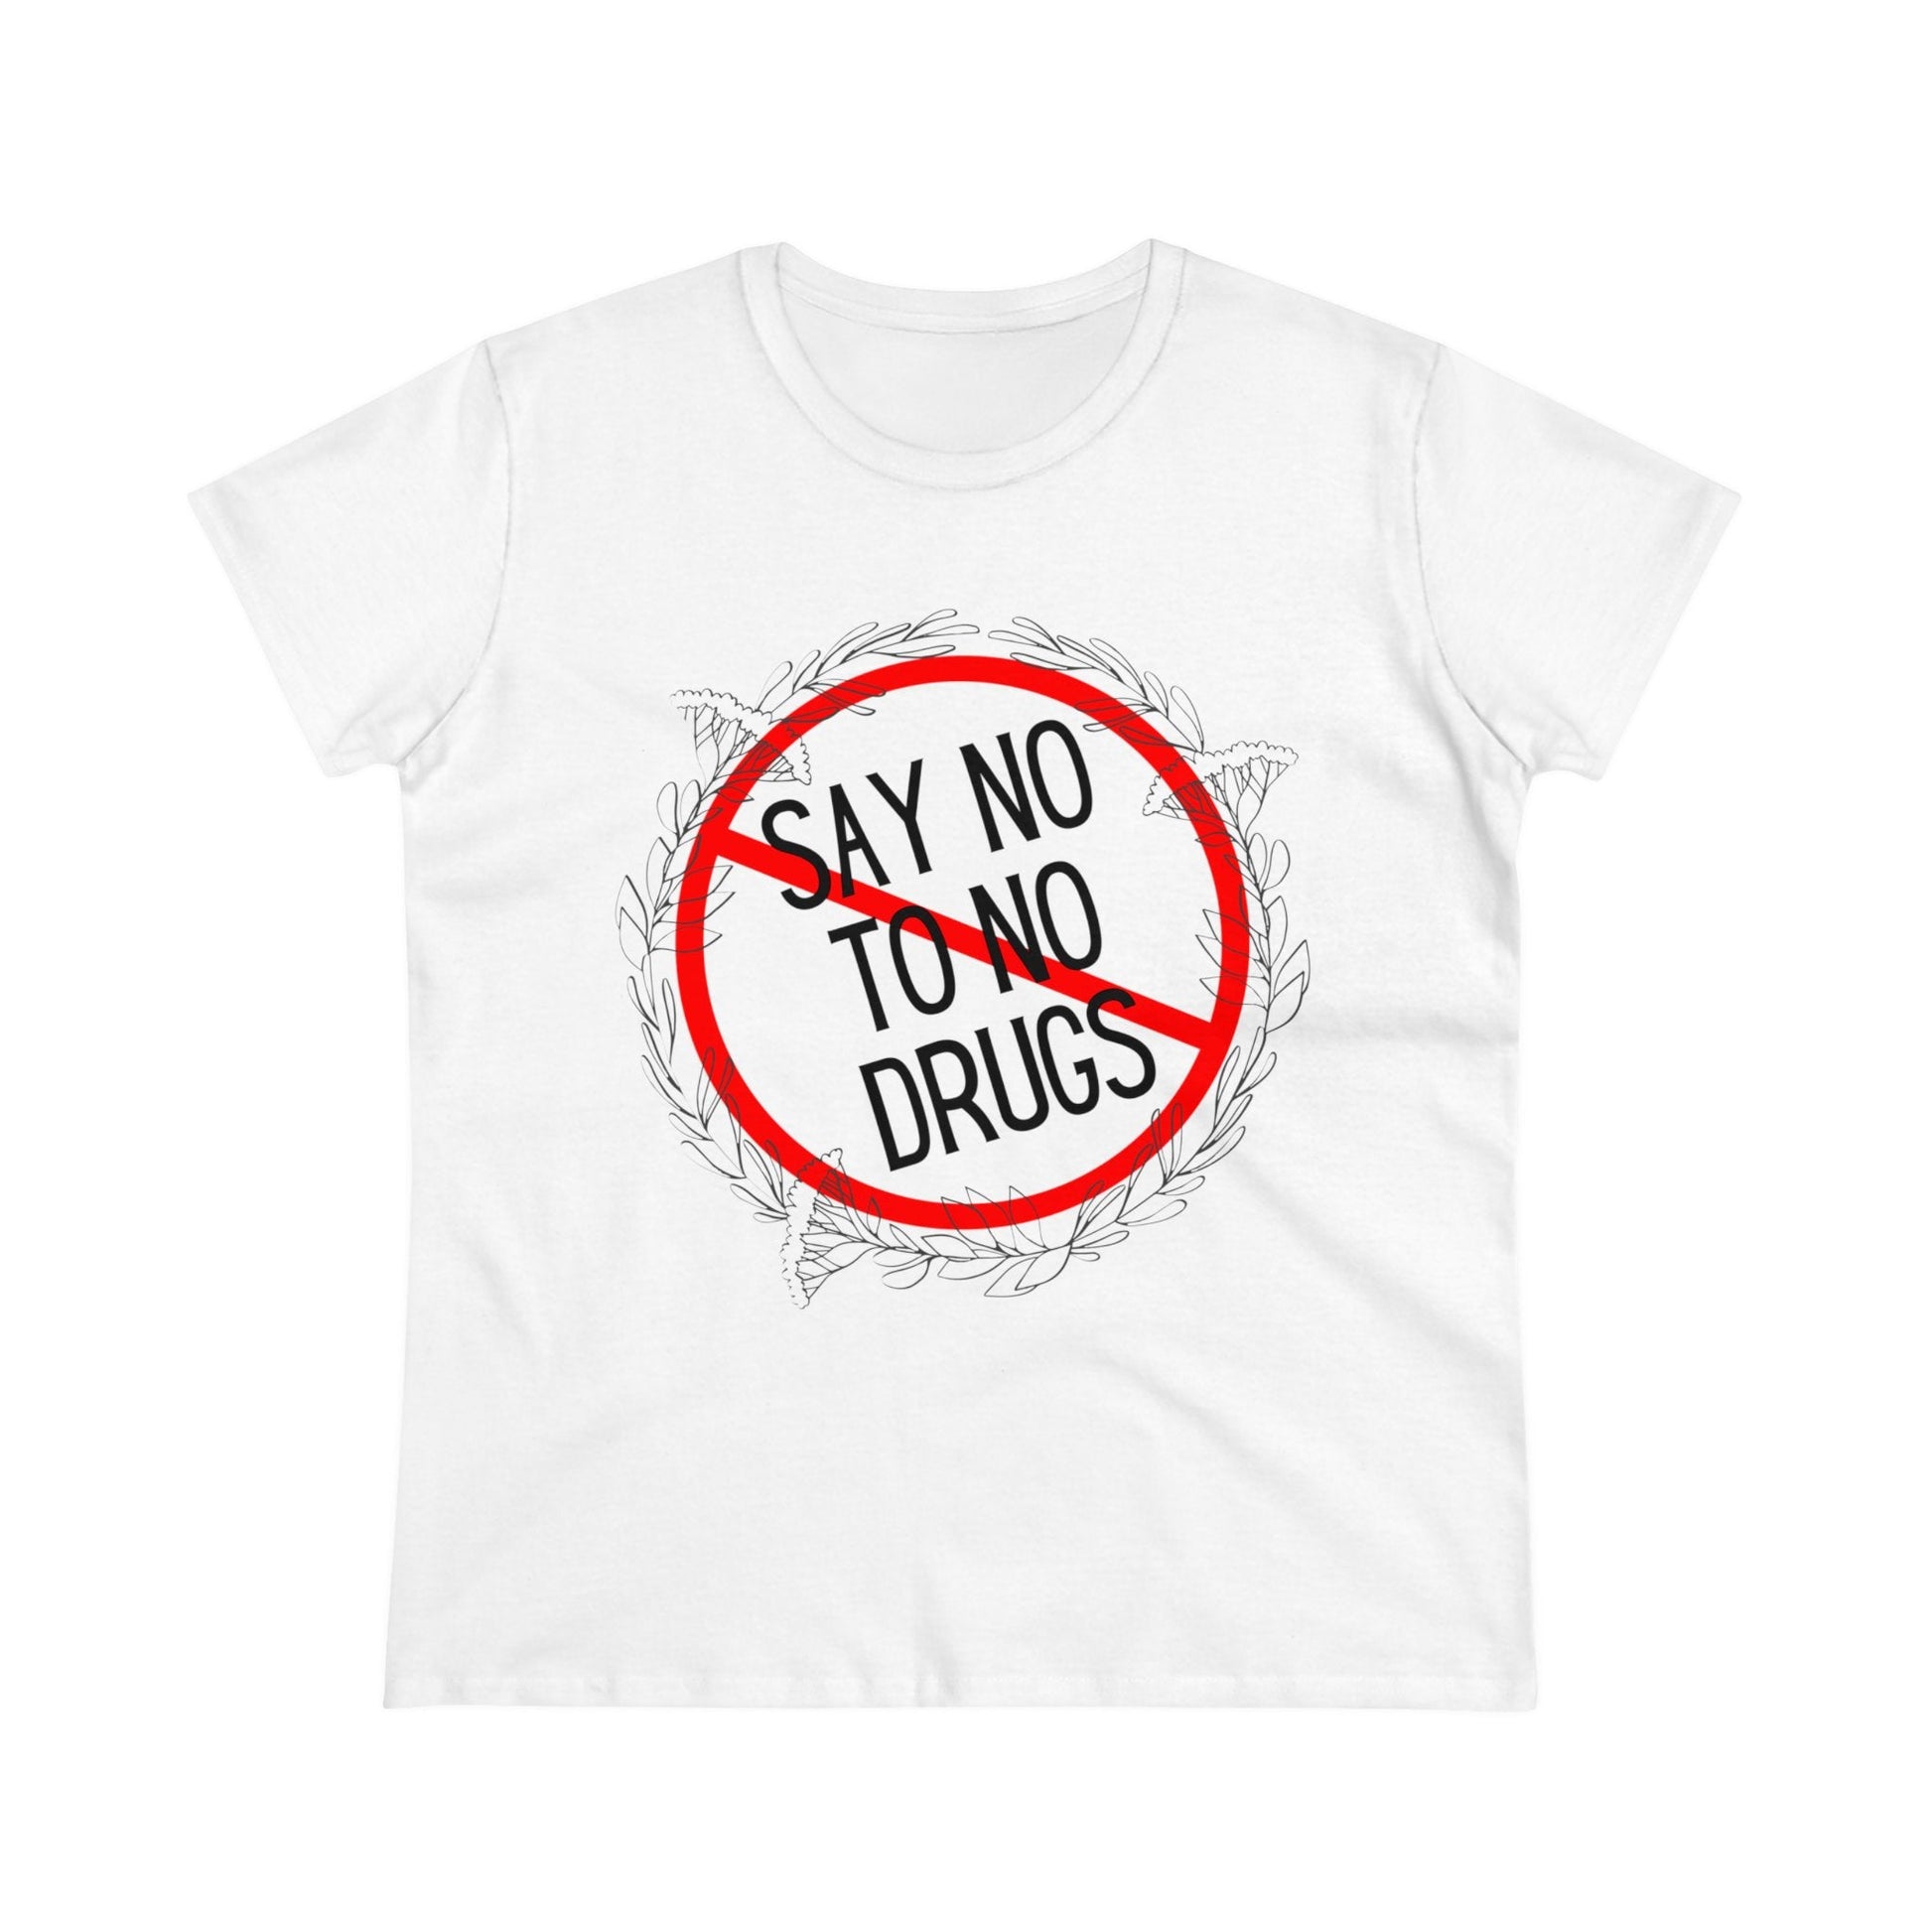 Say No to No Drugs Women's Midweight Cotton Tee